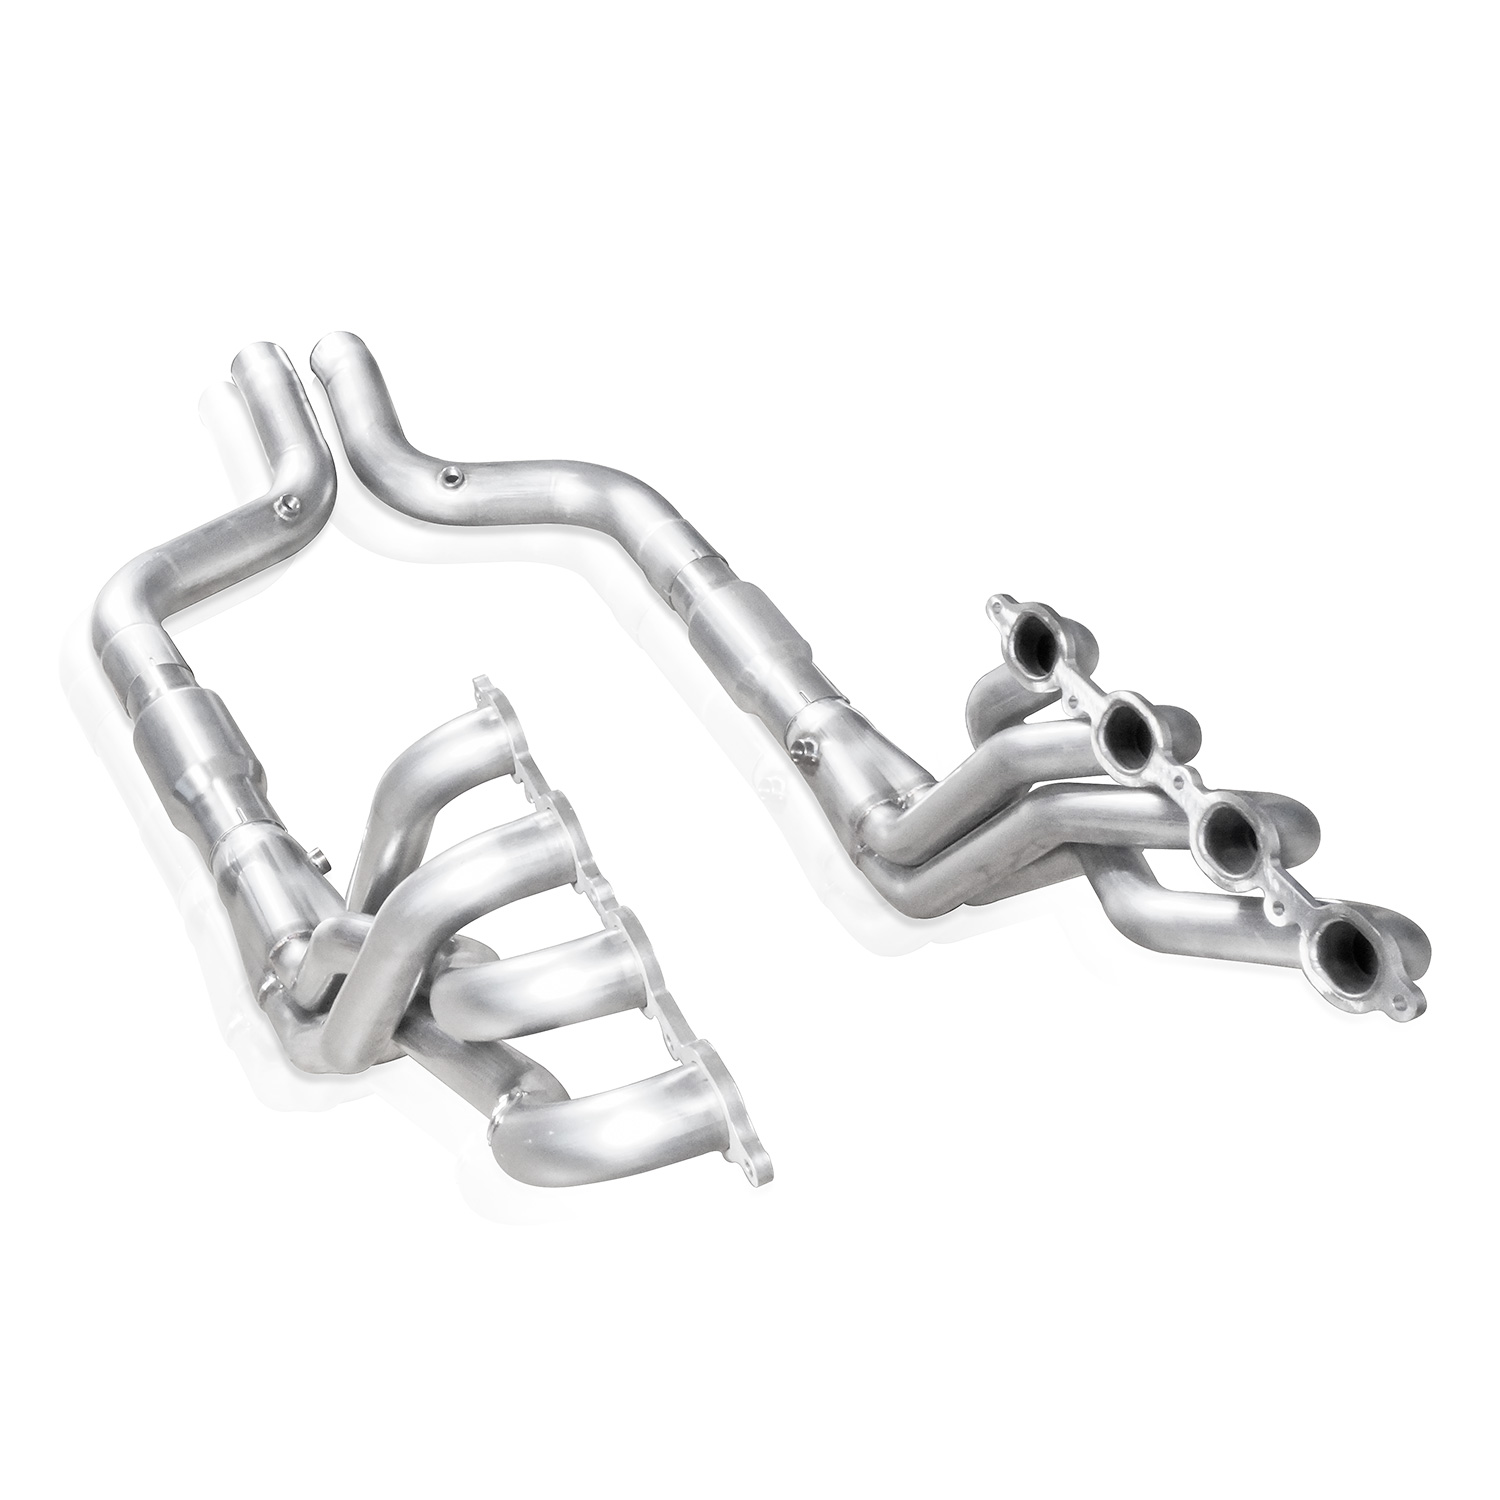 2016-2021 Camaro SS 6.2L SW Headers 1-7/8" With Catted Leads Performance Connect